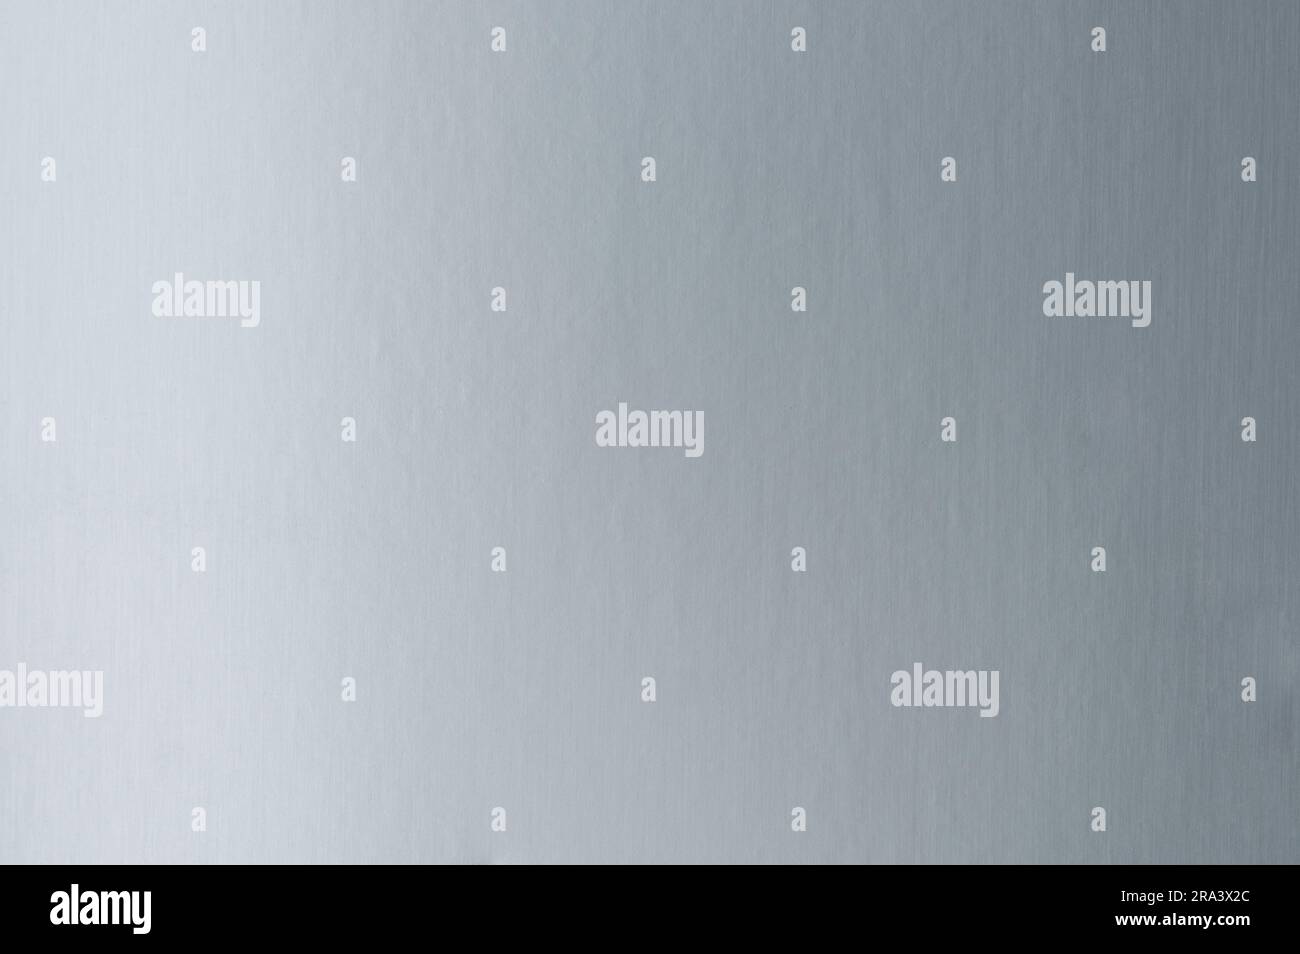 File:Grey galvanized smooth clean steel metal sheet seamless surface  texture.jpg - Wikimedia Commons